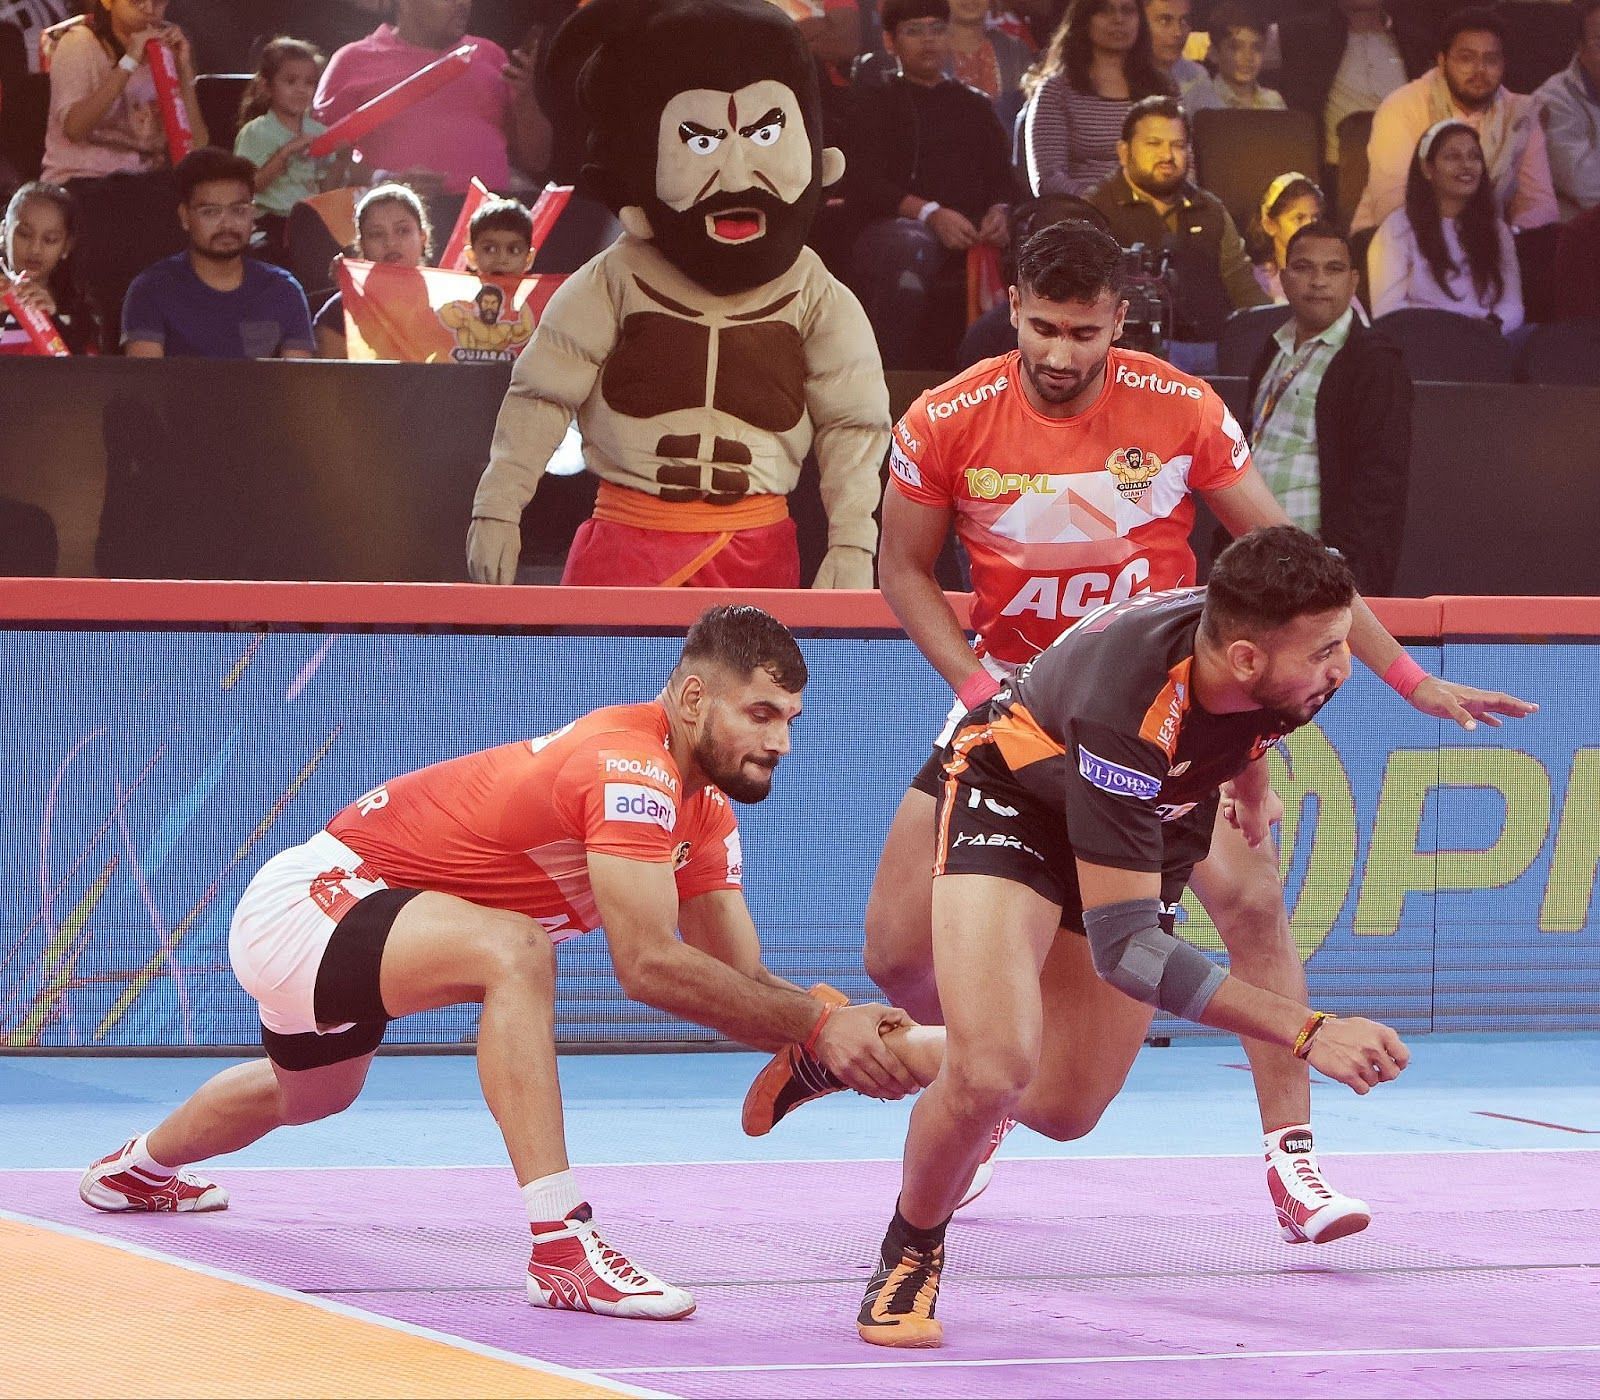 Sombir with an ankle-hold of Guman Singh (Credits: PKL)